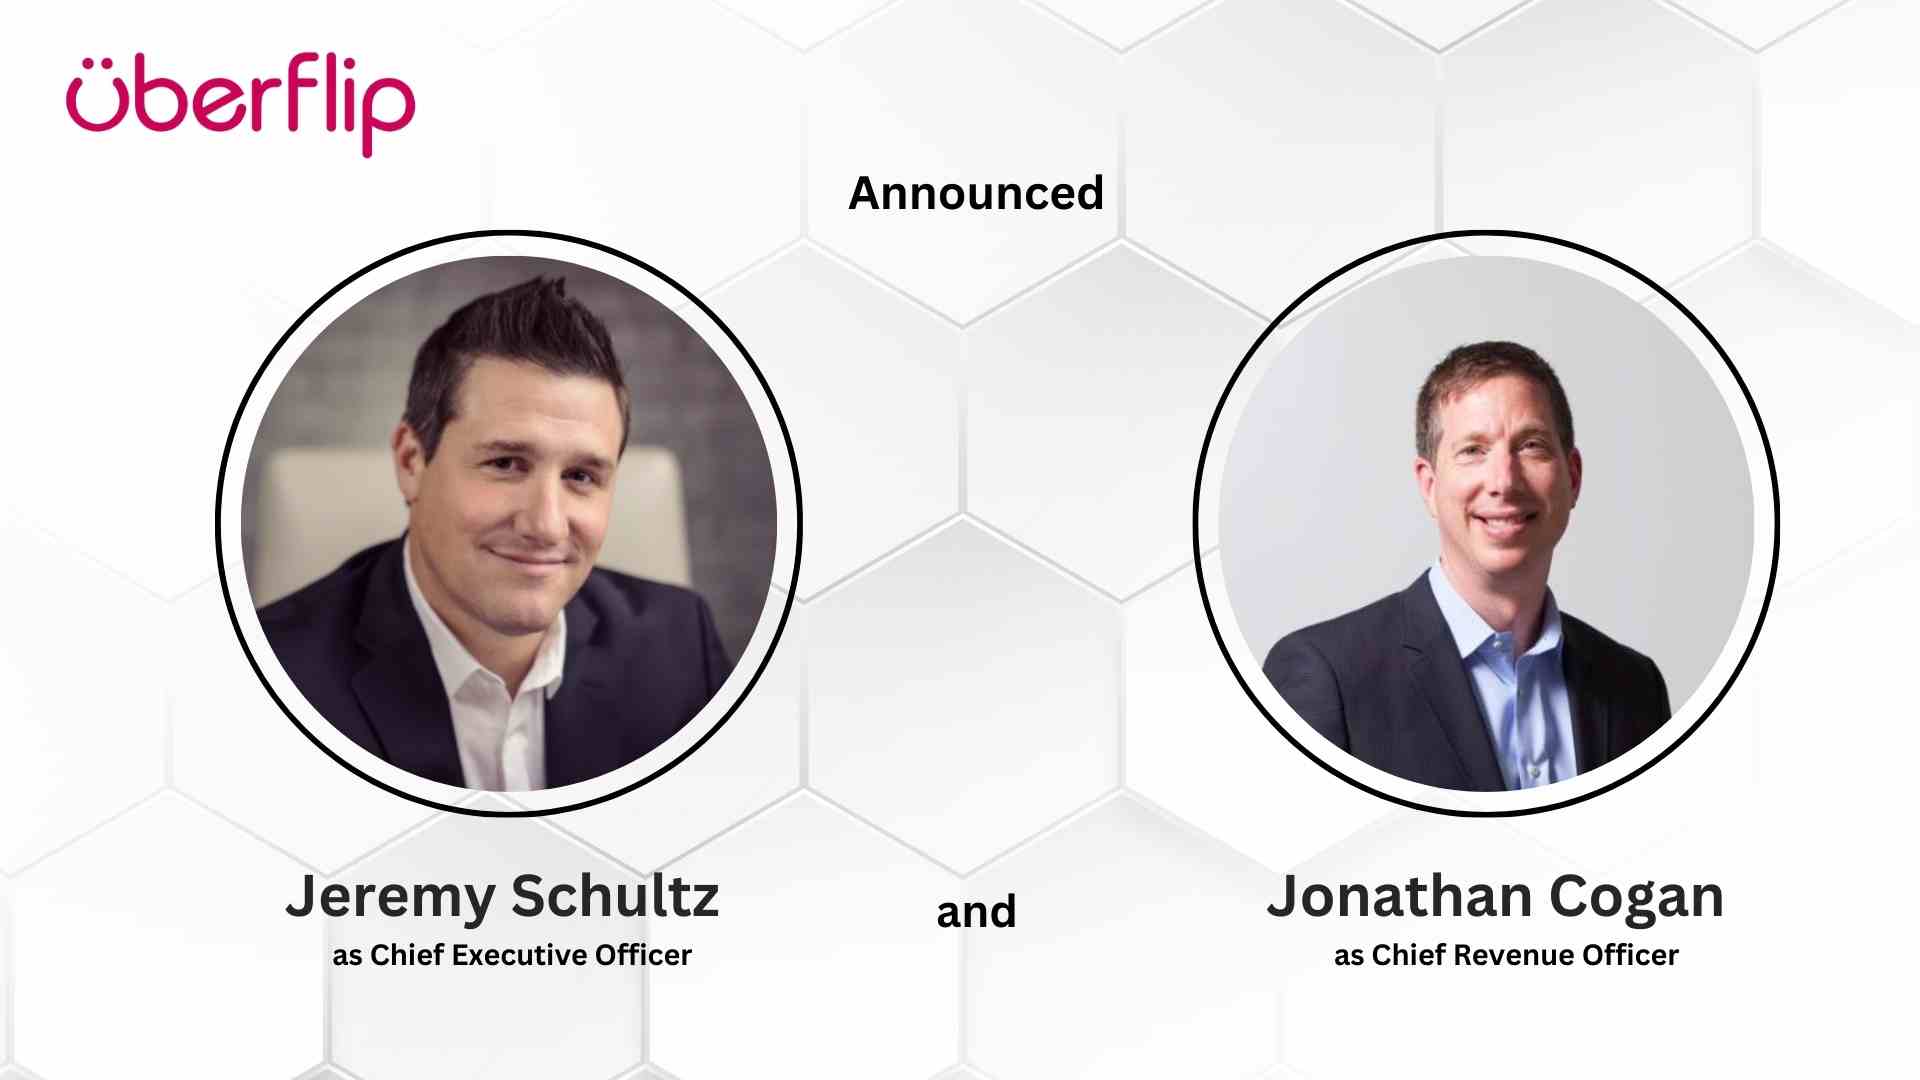 Uberflip Announces Jeremy Schultz as Chief Executive Officer and Jonathan Cogan as Chief Revenue Officer